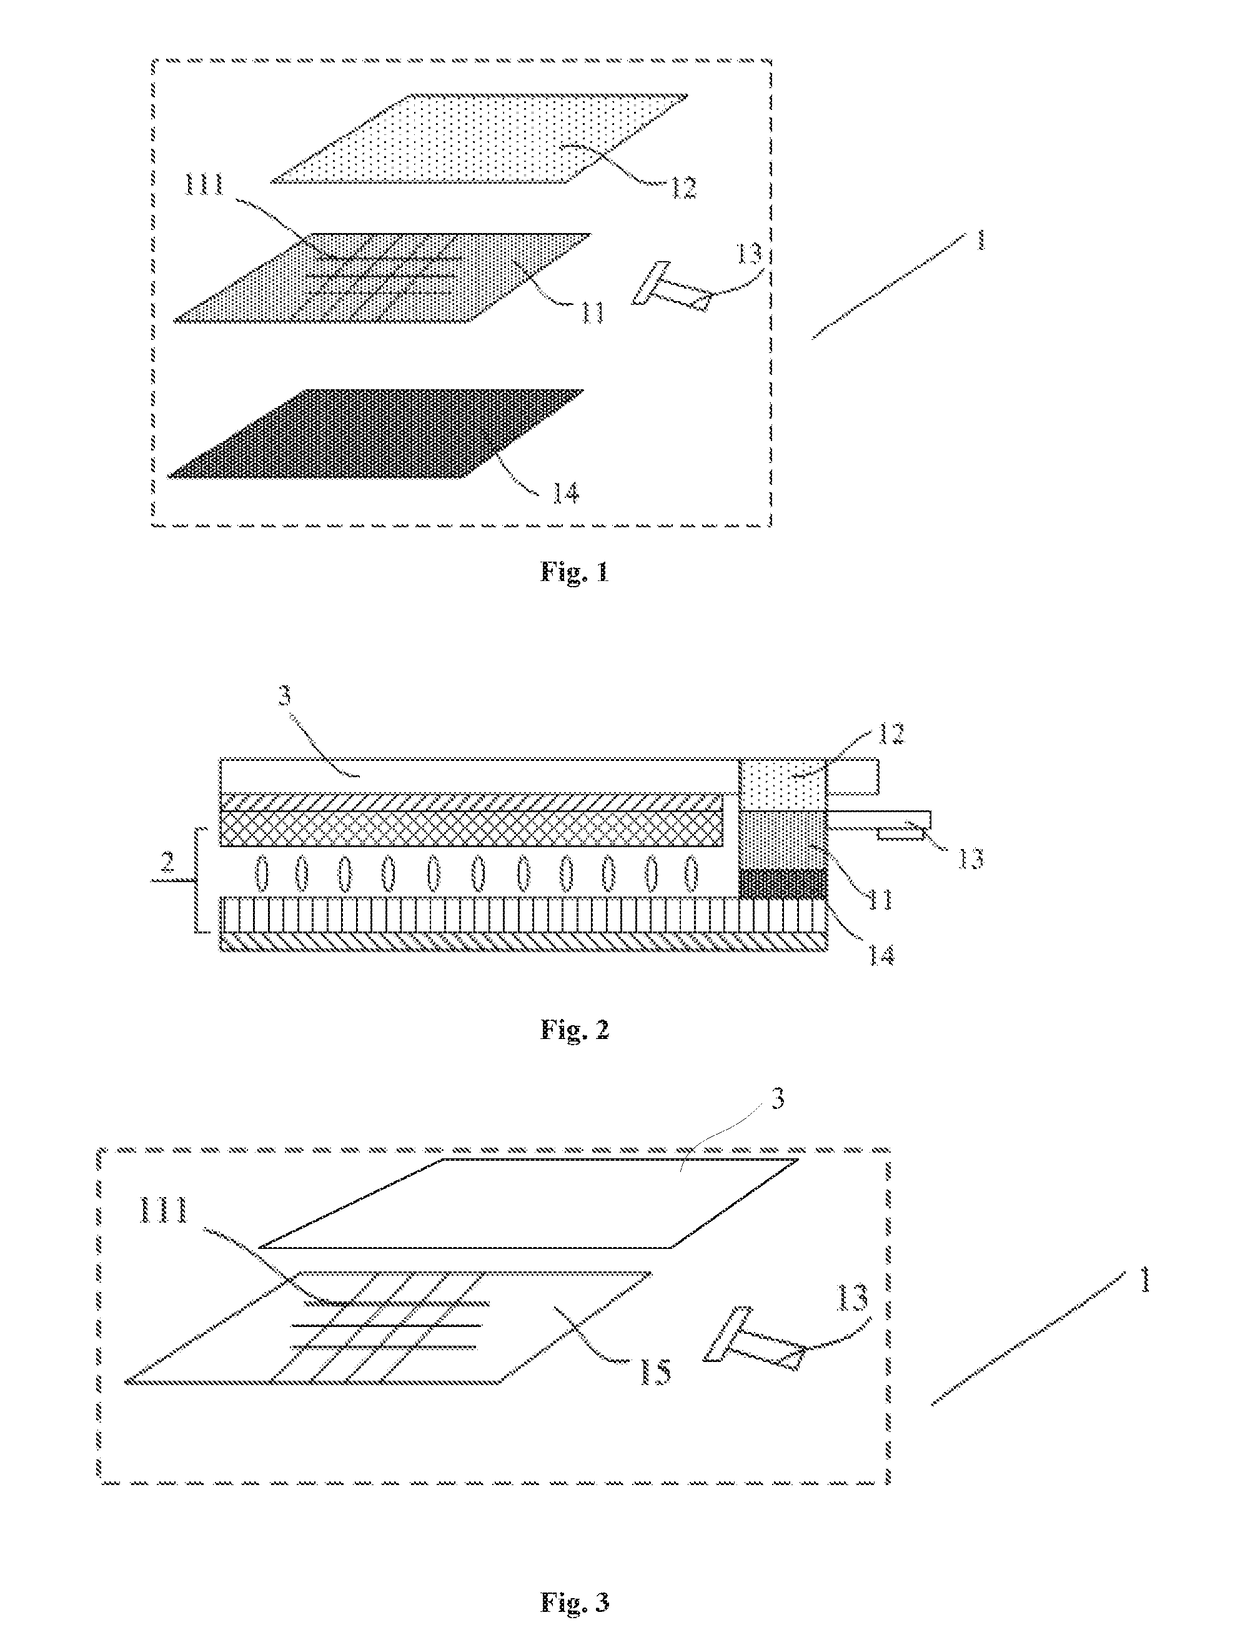 Fingerprint recognition device, display screen and display device